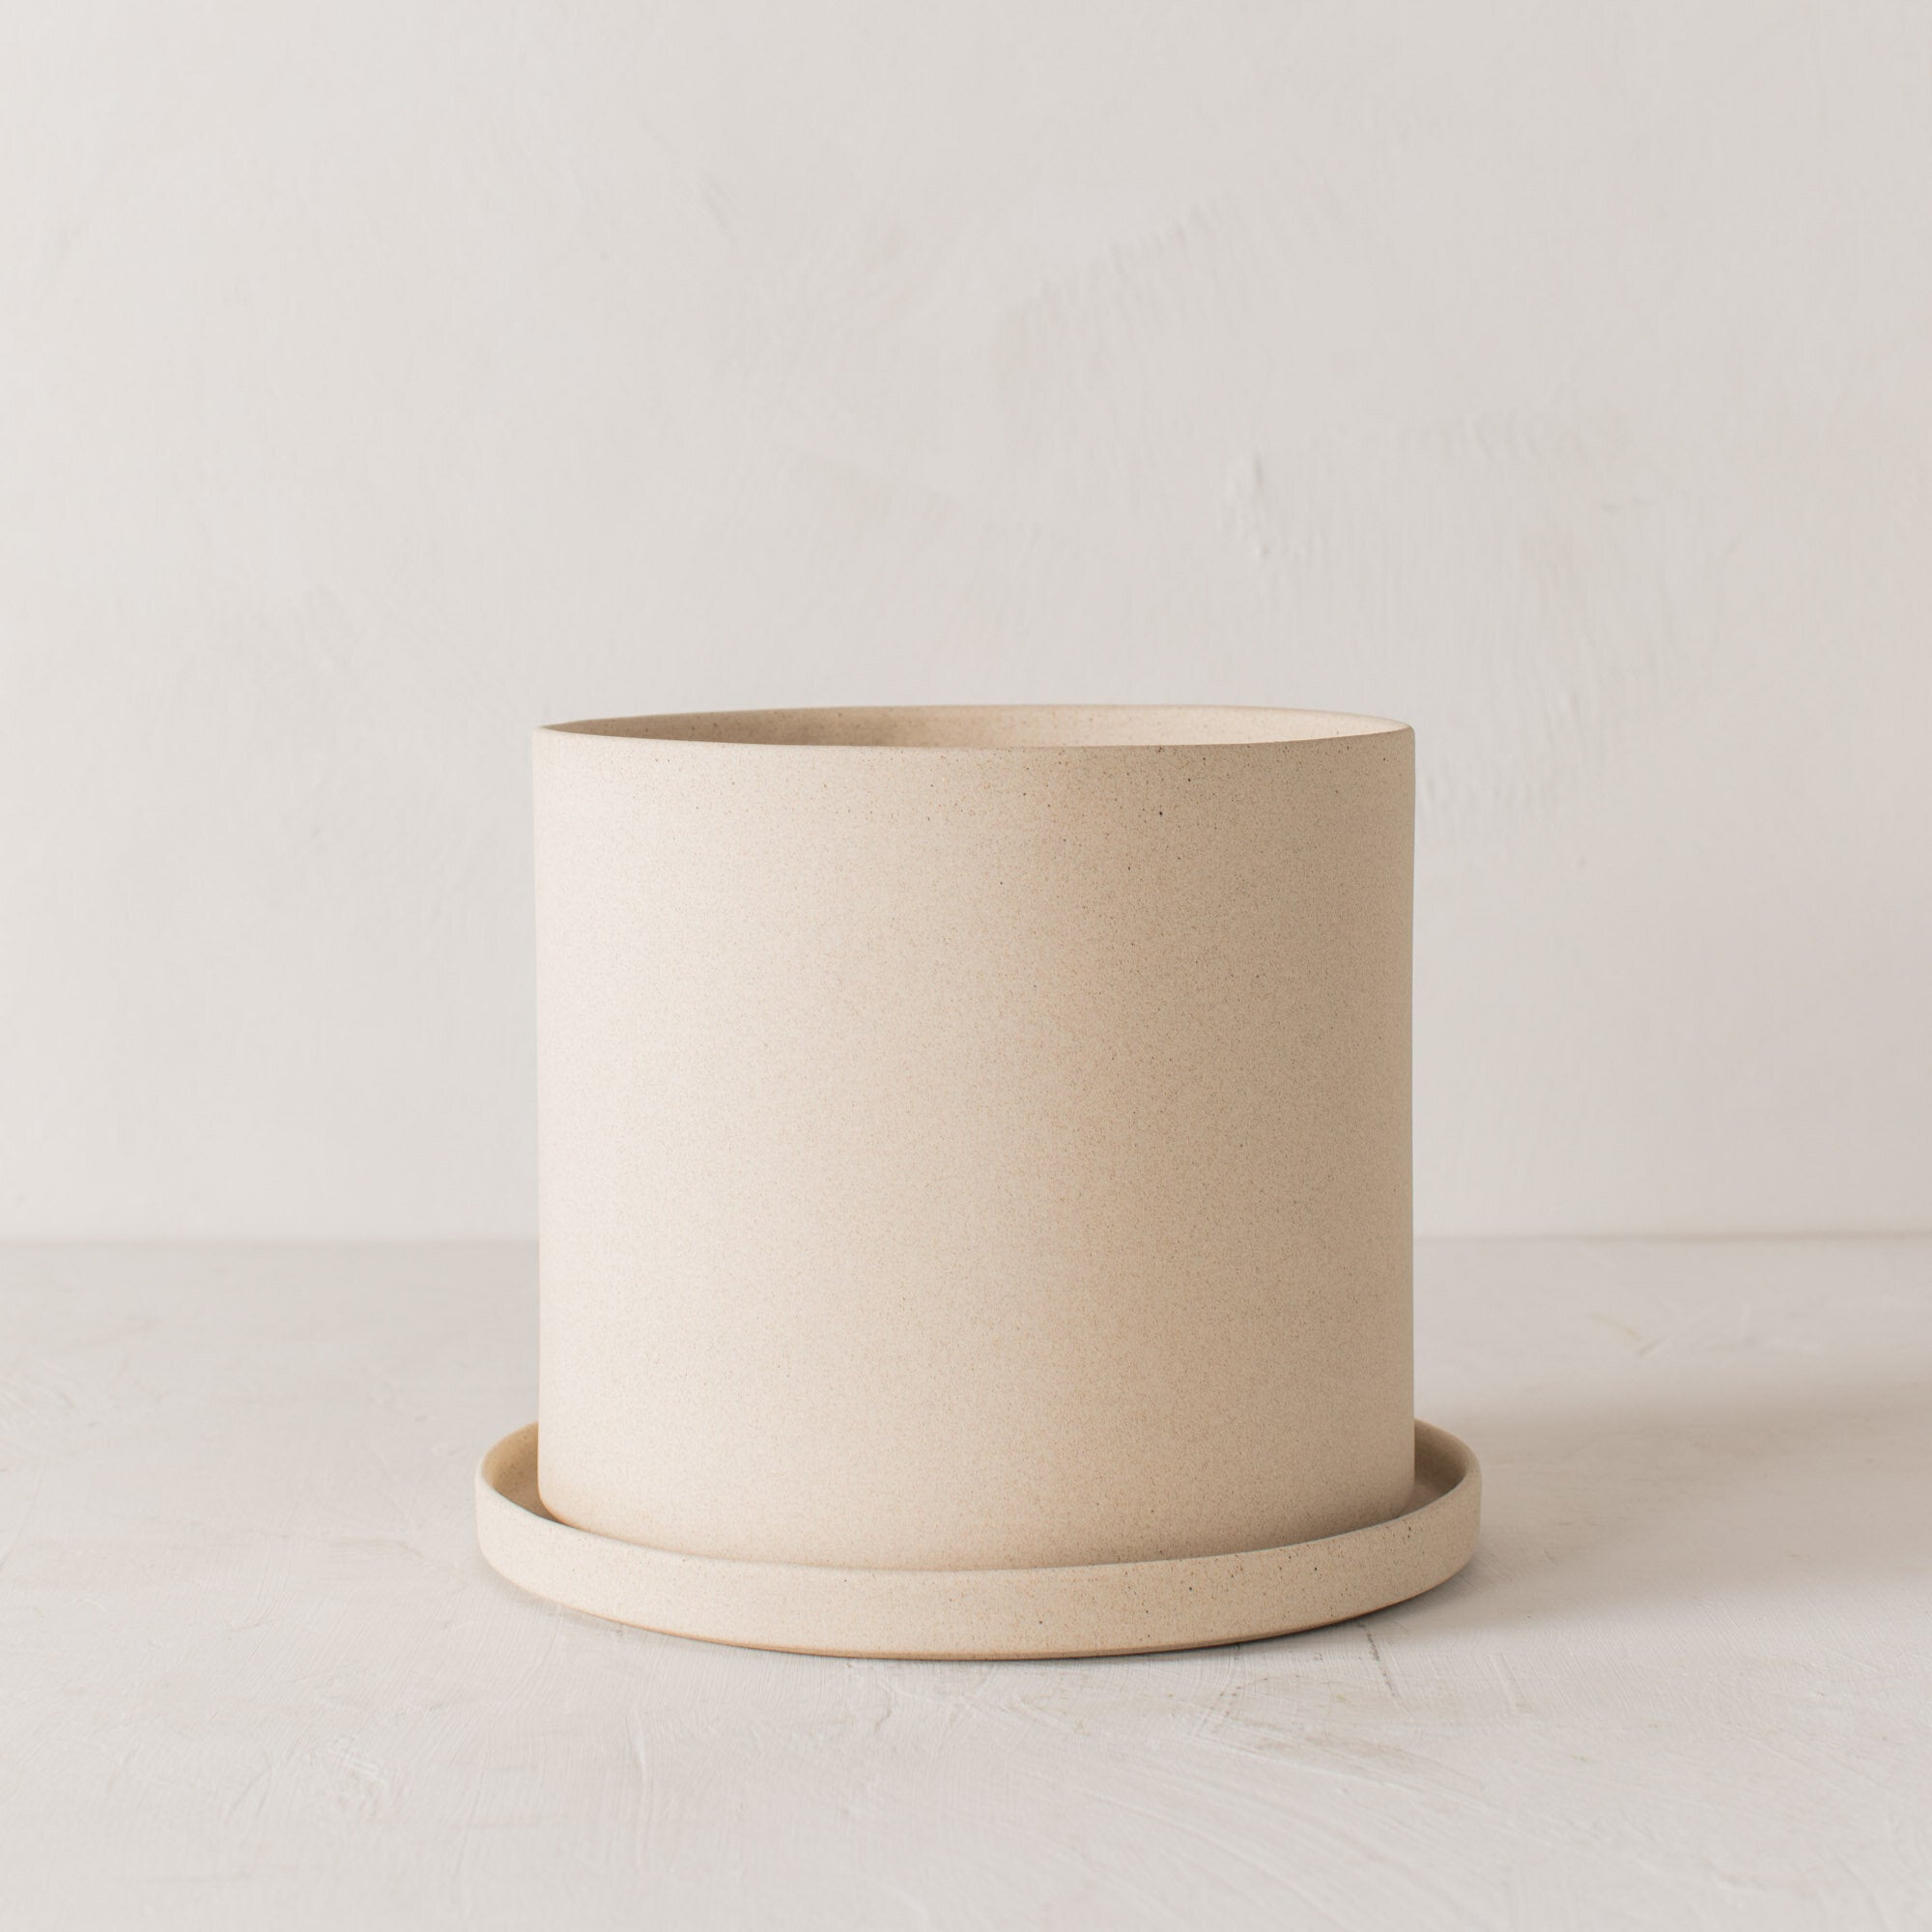 Stoneware 8 inch ceramic planter with bottom drainage dish. Staged on a white plaster textured tabletop against a plaster textured white wall. Designed by Convivial Production, sold by Shop Verdant Kansas City plant store.